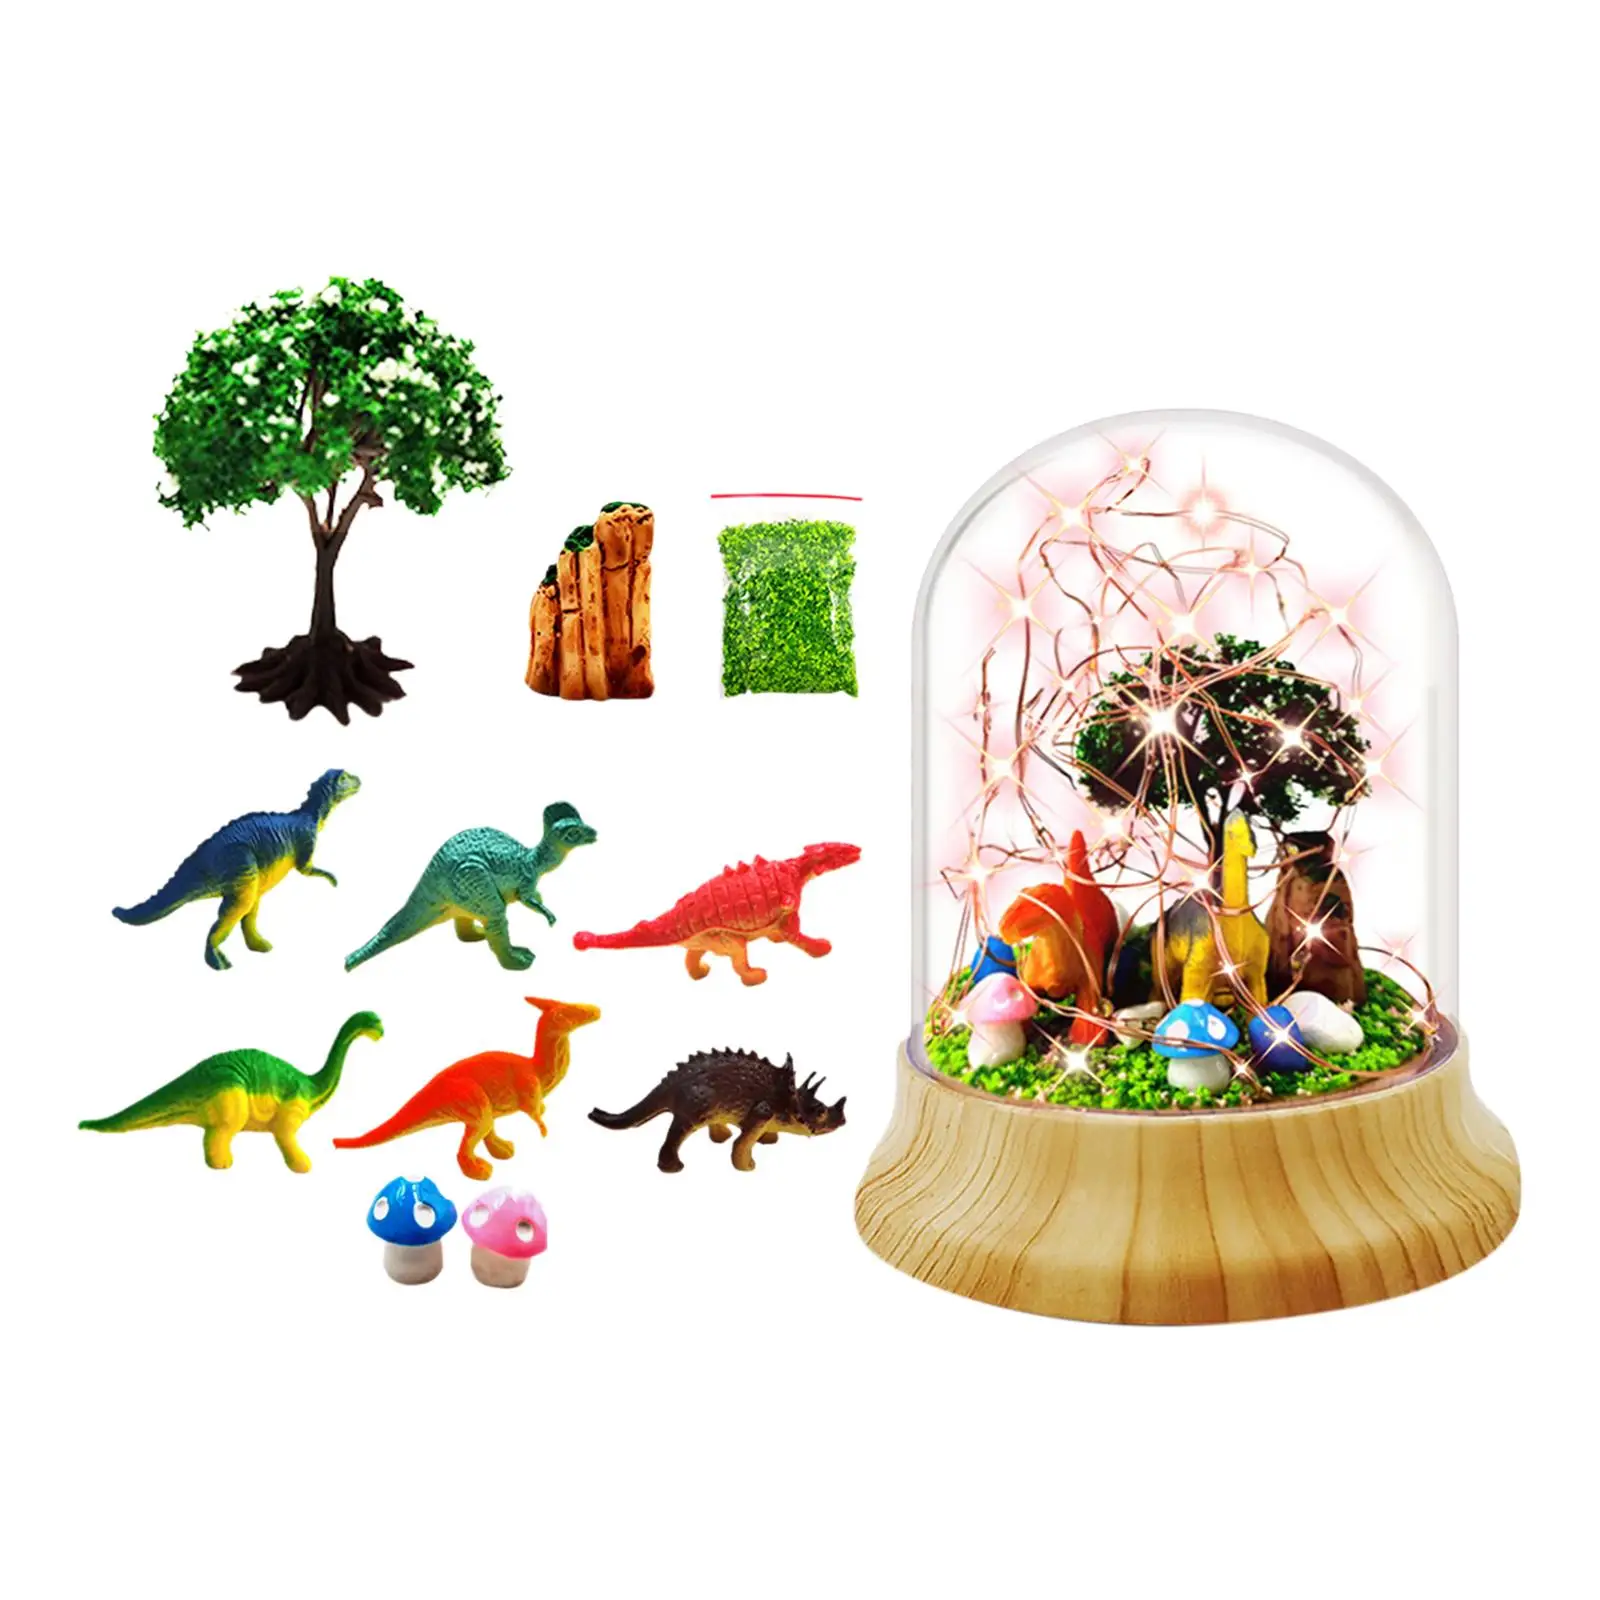 Dinosaur Night Light DIY Material Artificial Romantic Table Centerpiece Eternal Party Favor Crafts for Birthday Gift Decorations